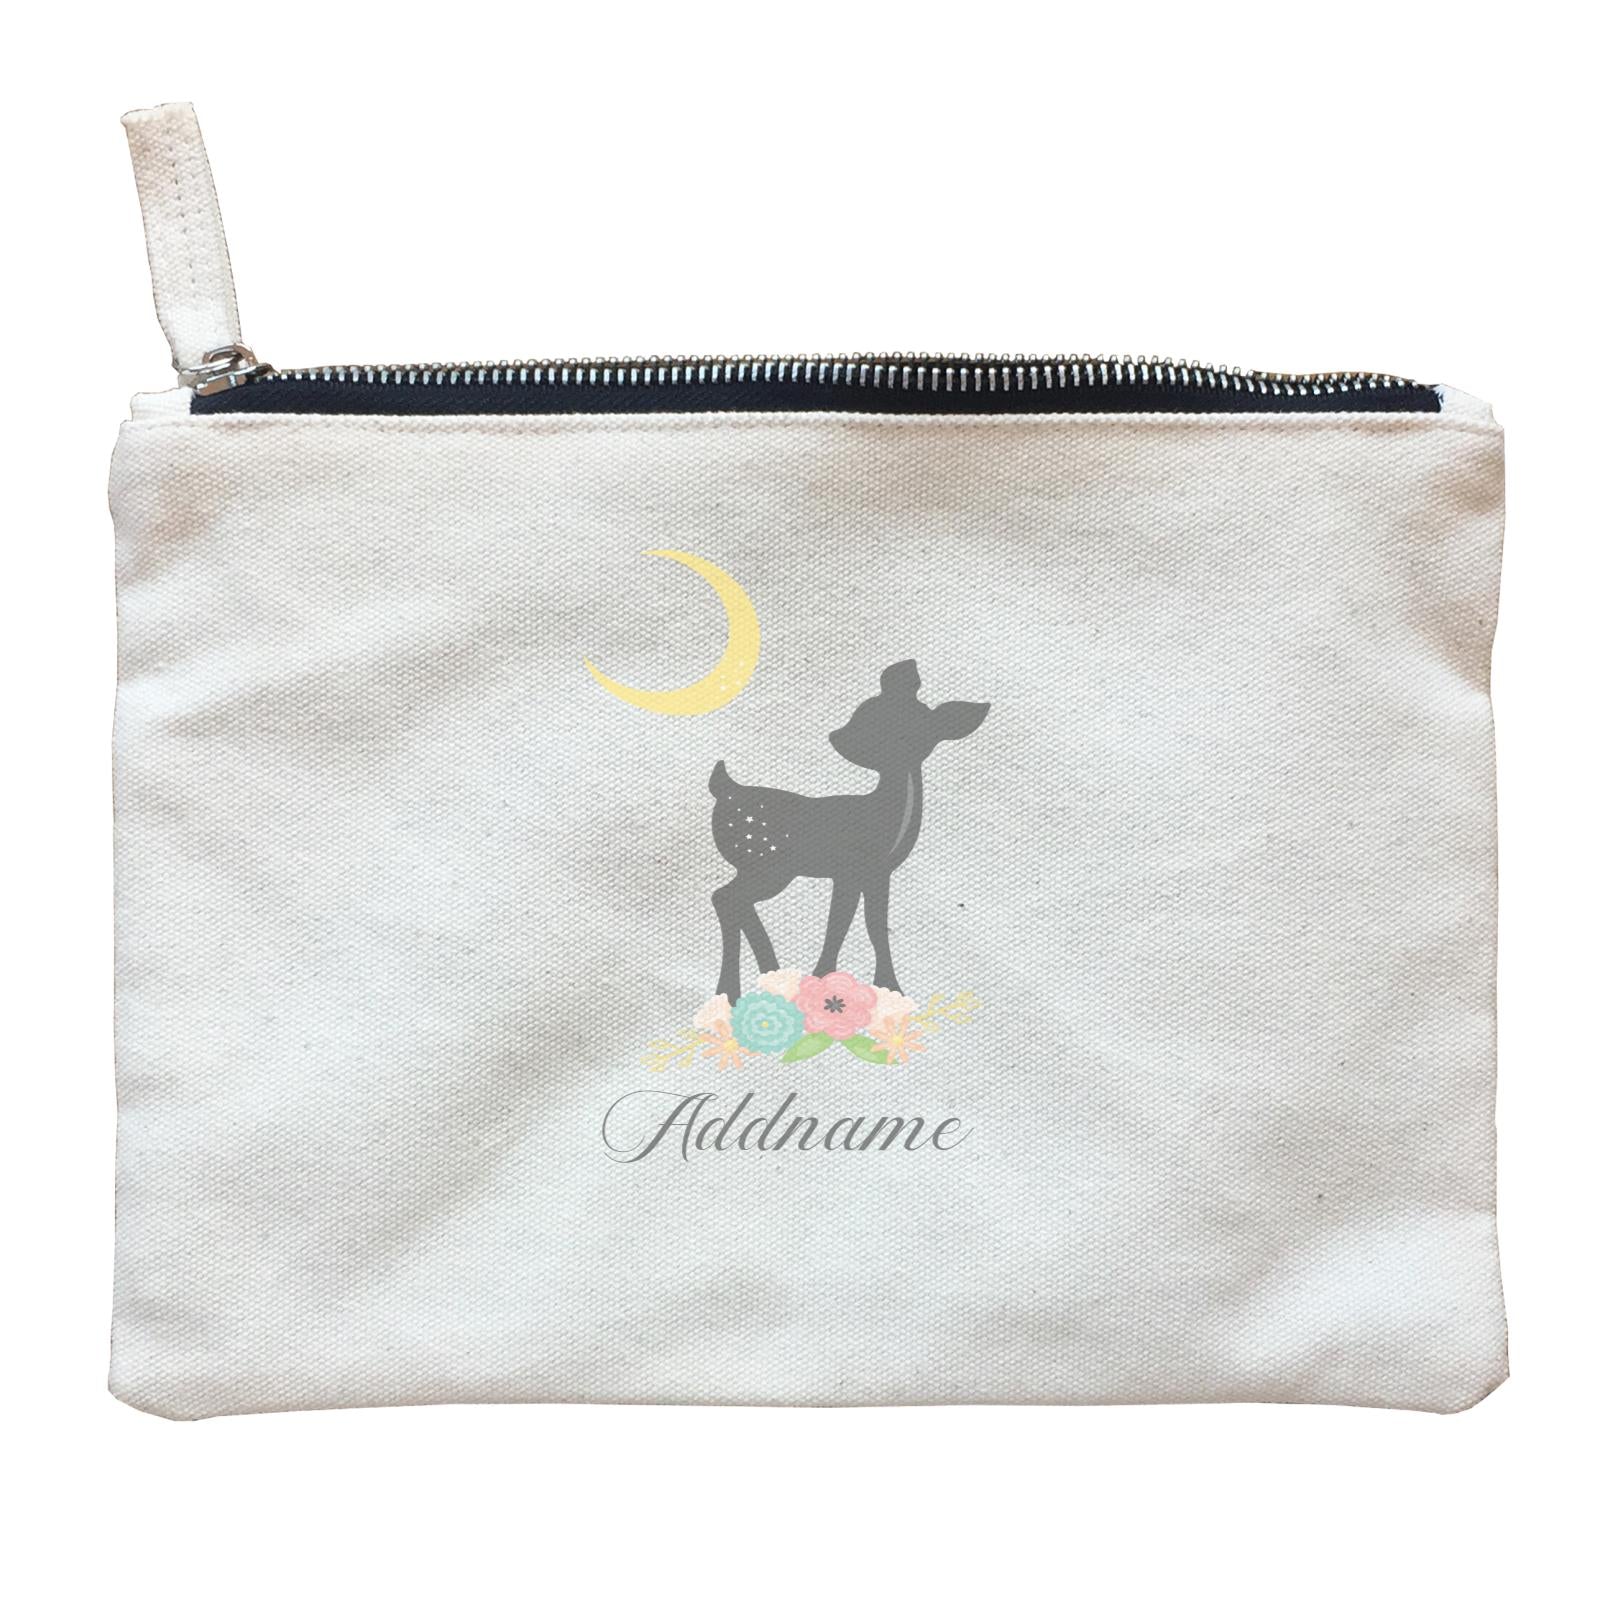 Basic Family Series Pastel Deer Black Fawn With Flower Addname Zipper Pouch